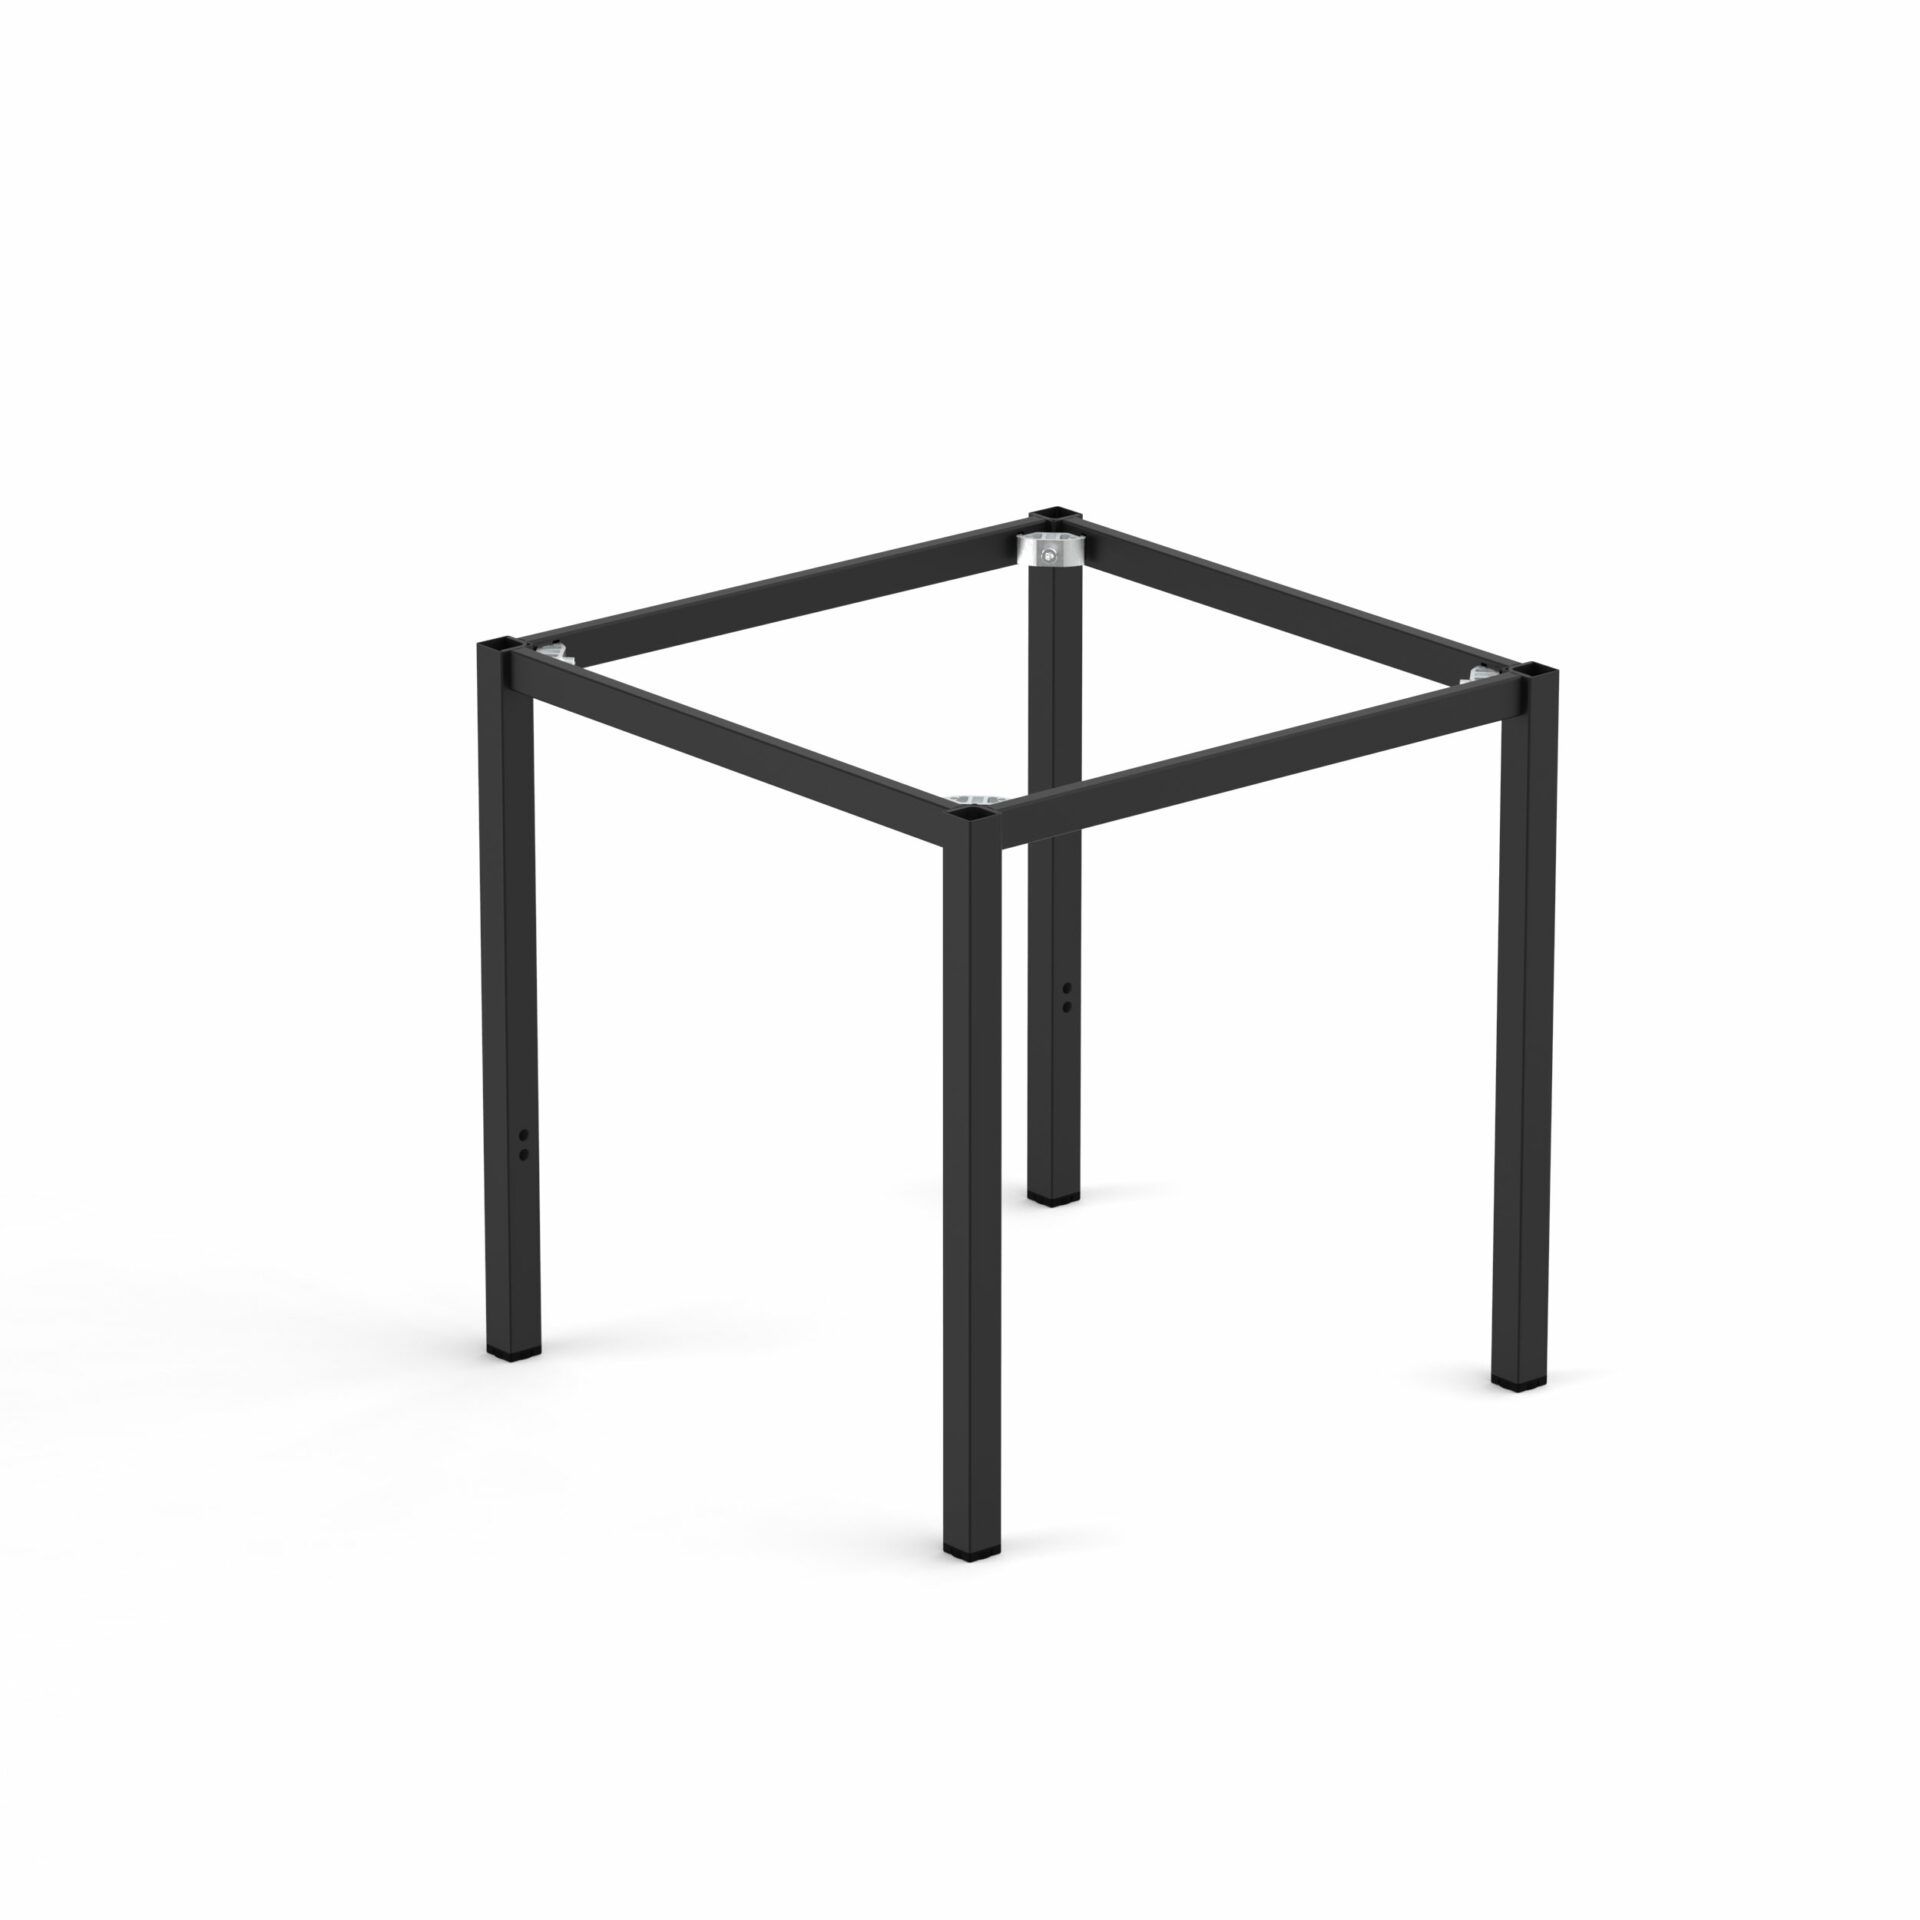 Spire Square leg Table Height Frame 740 x 740 x 720H